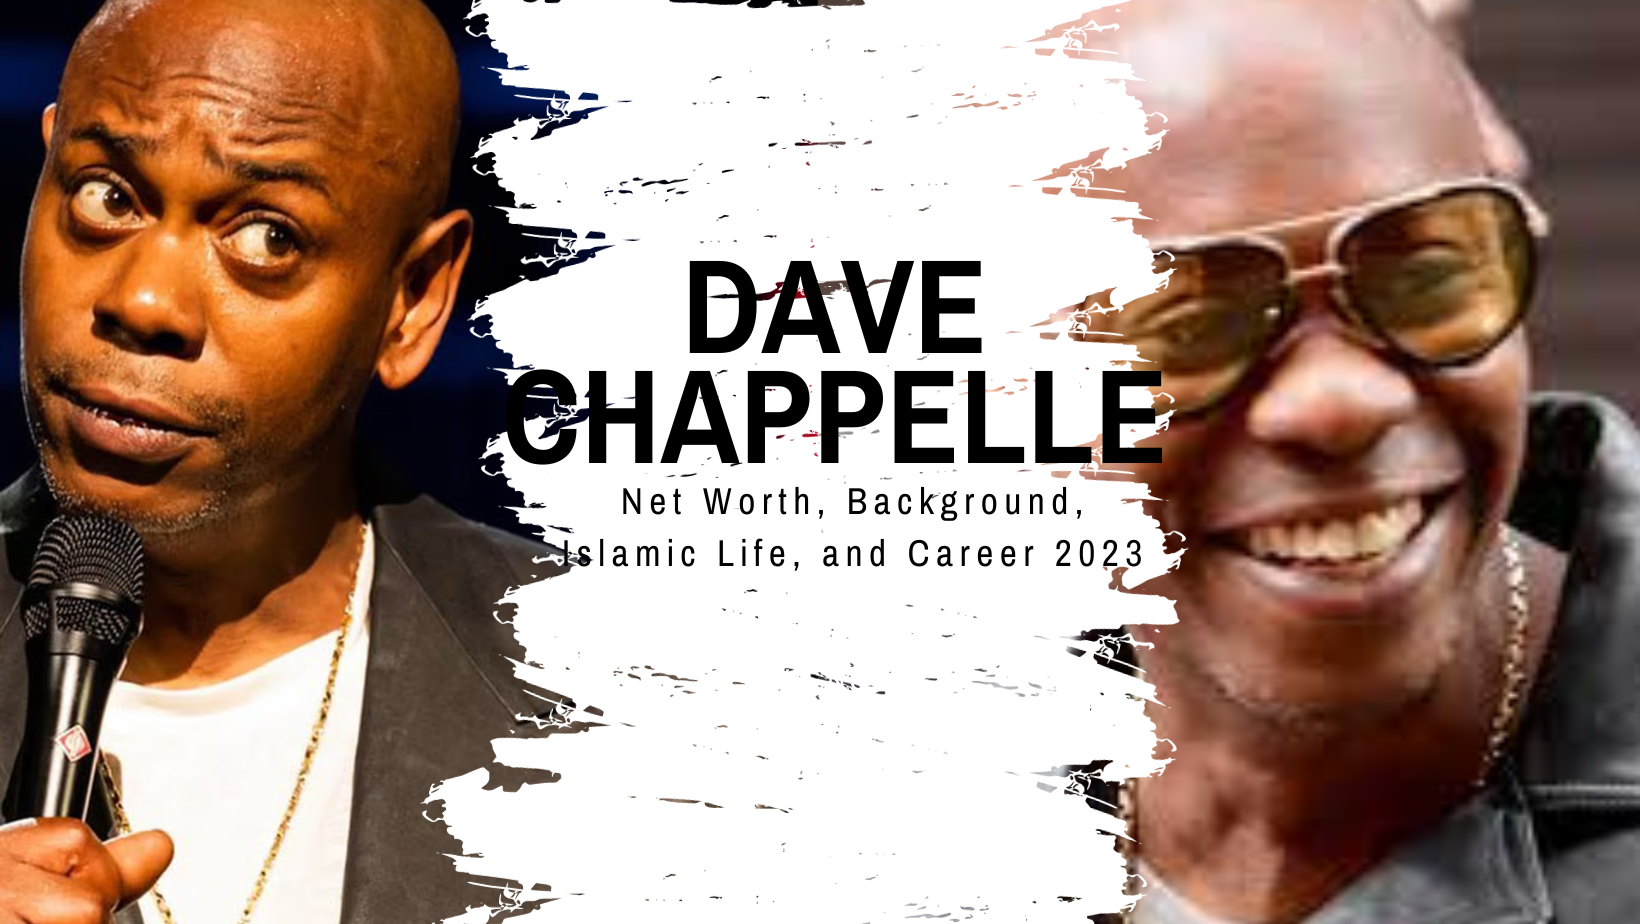 Dave Chappelle Net Worth, Background, Islamic Life, and Career 2023